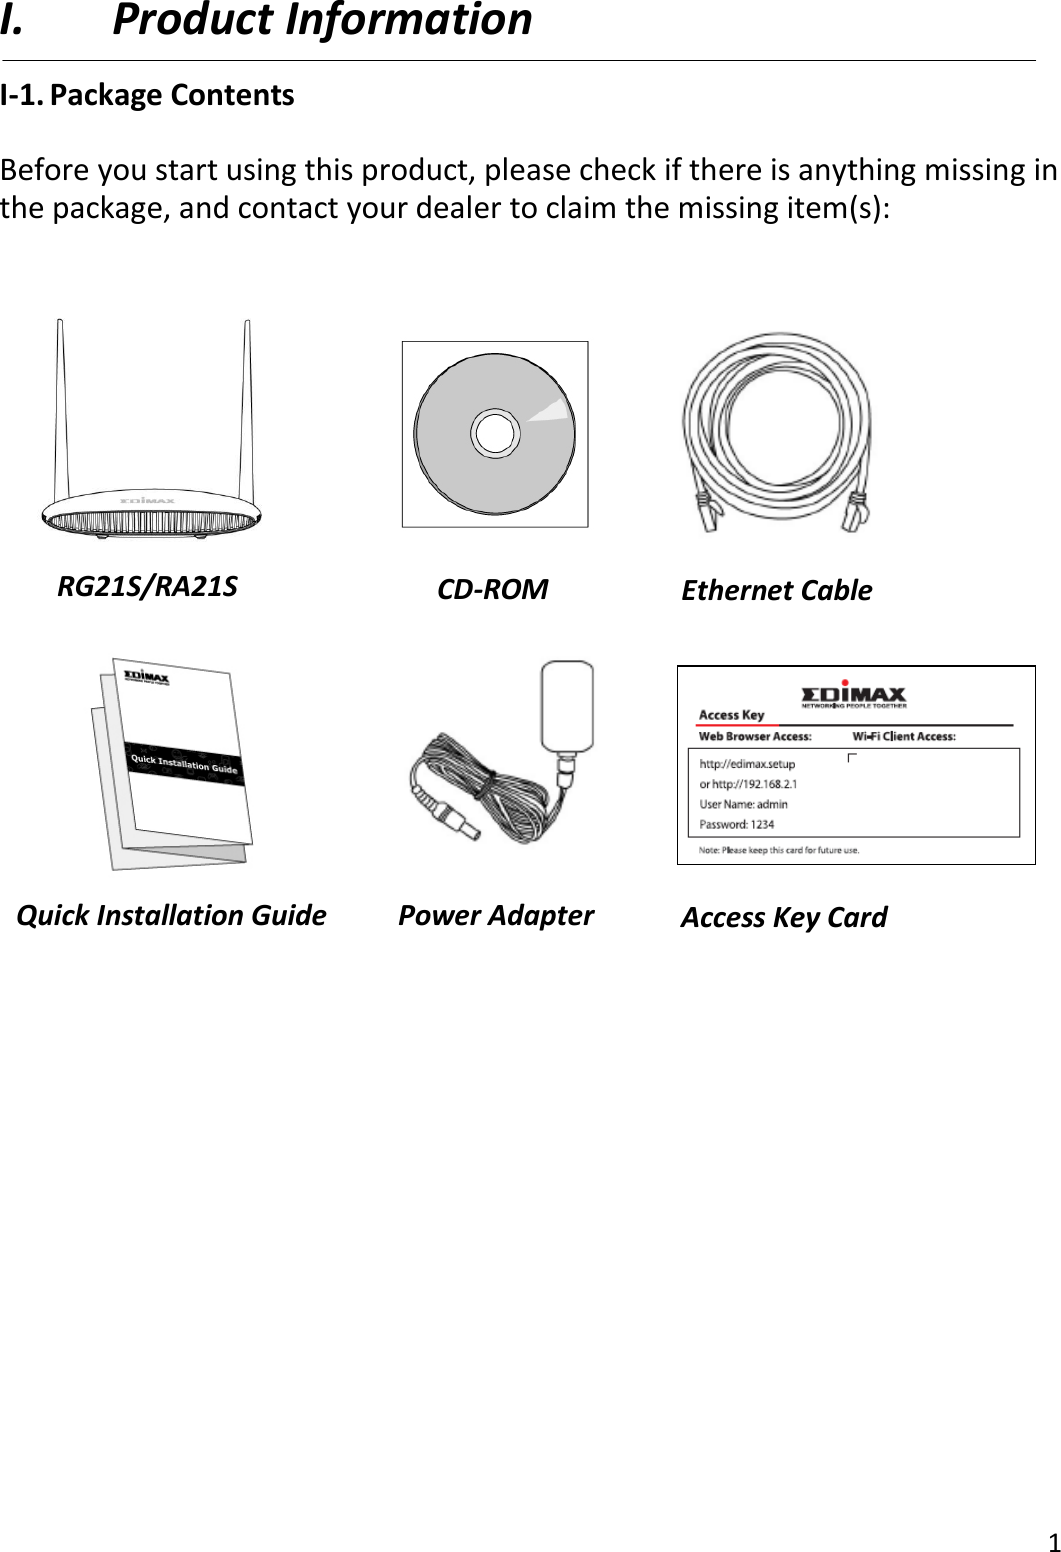 1  I. Product Information I-1. Package Contents  Before you start using this product, please check if there is anything missing in the package, and contact your dealer to claim the missing item(s):                        RG21S/RA21S  Ethernet Cable  Quick Installation Guide  Power Adapter  CD-ROM  Access Key Card 